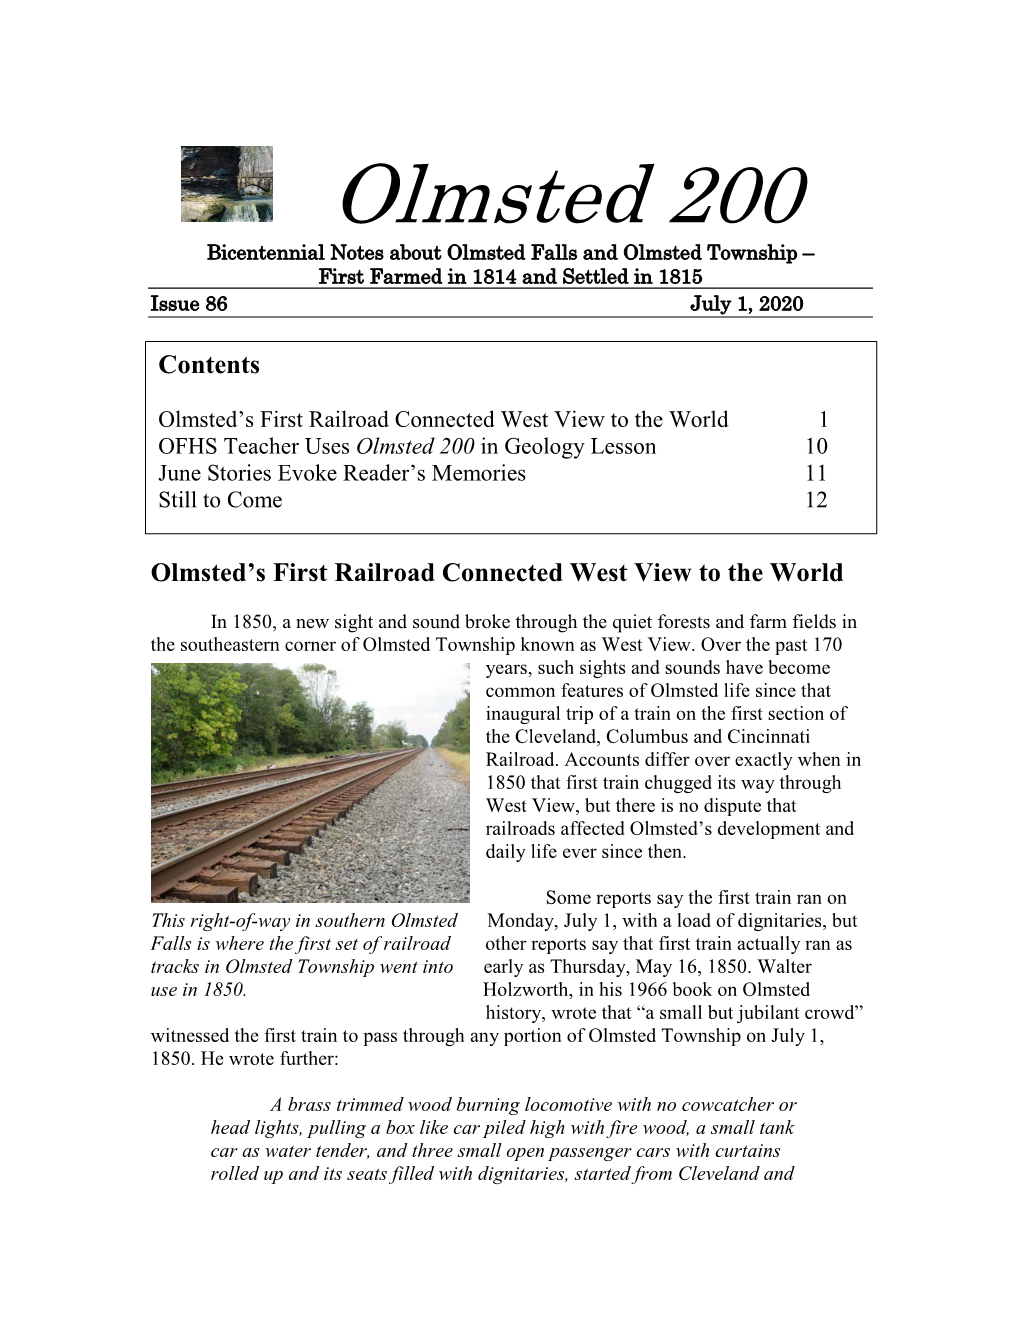 Olmsted 200 Bicentennial Notes About Olmsted Falls and Olmsted Township – First Farmed in 1814 and Settled in 1815 Issue 86 July 1, 2020